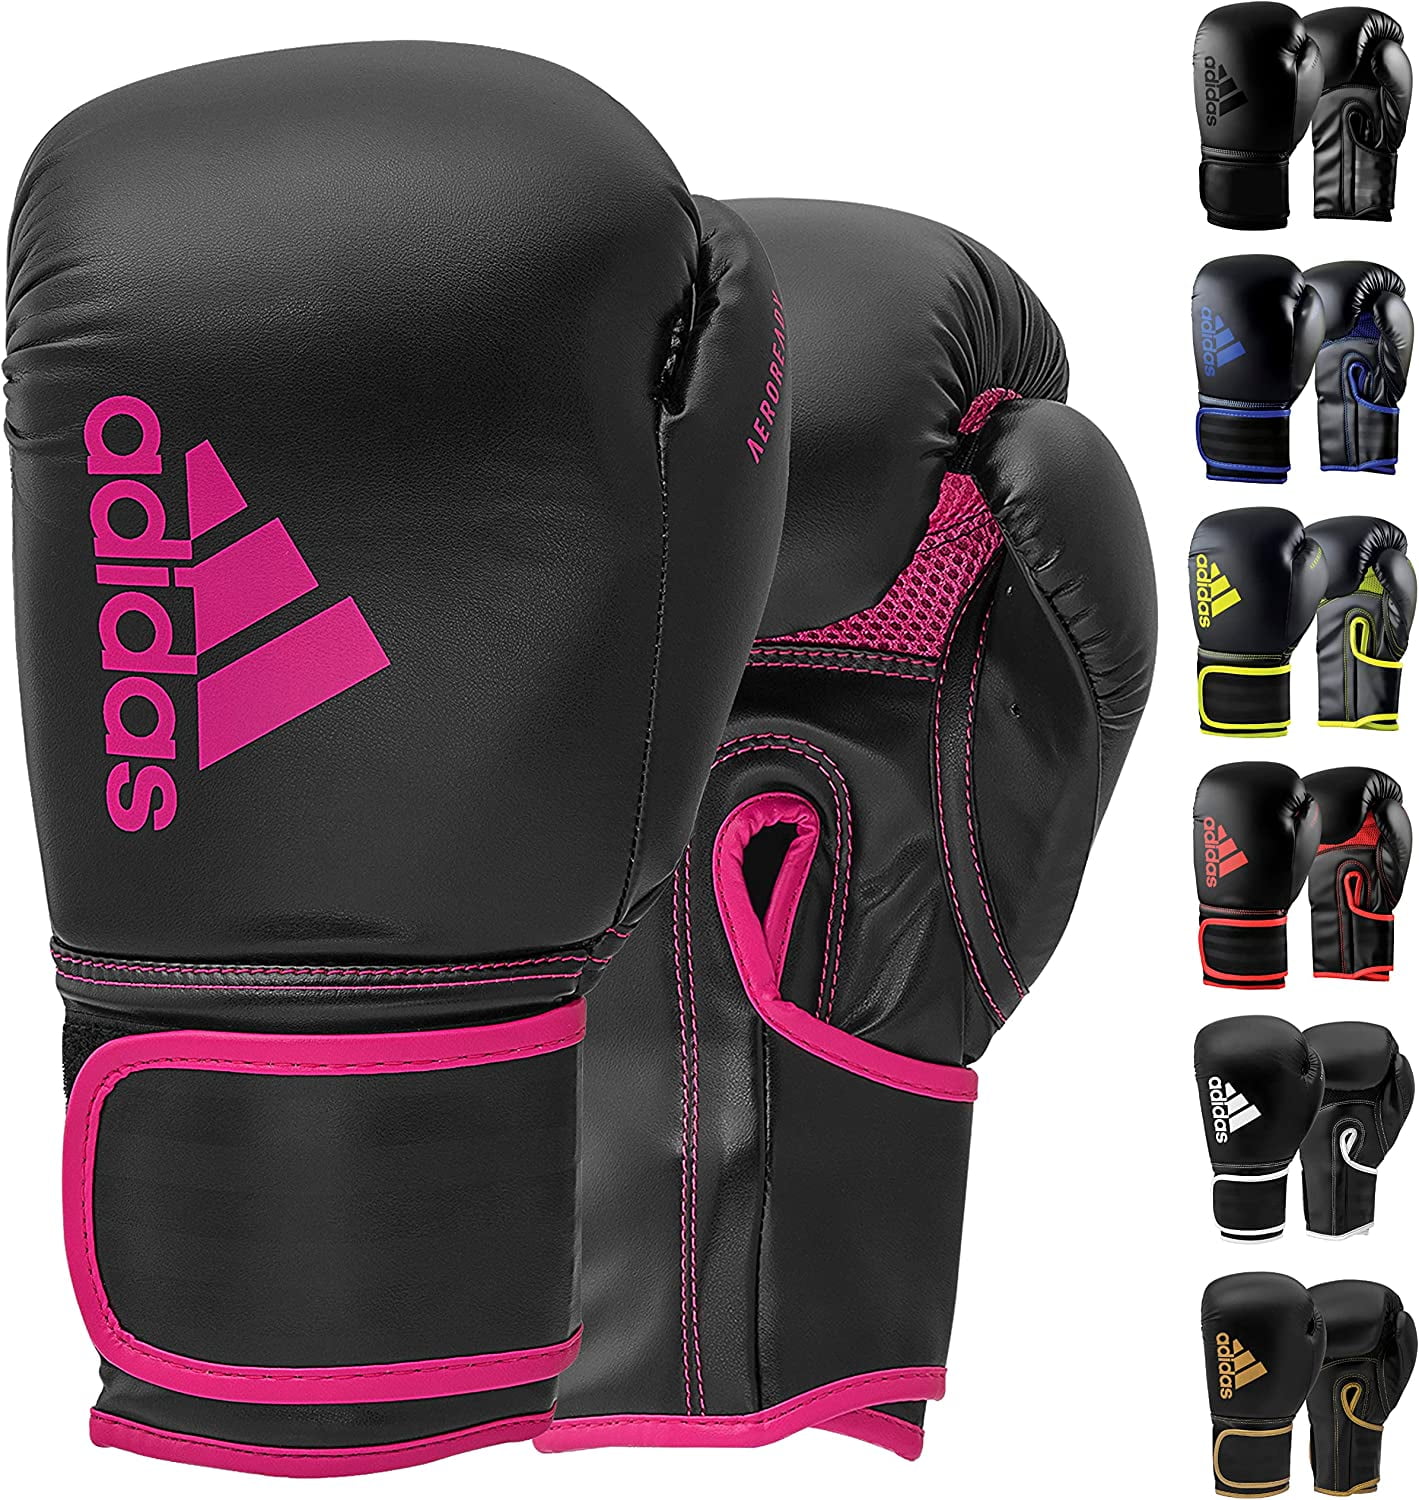 pair and Gloves 80 Blac/Pink, for Sparring Kickboxing Women Adidas - Hybrid - Gloves, Boxing Men, for Gloves - 8oz Kids Training set